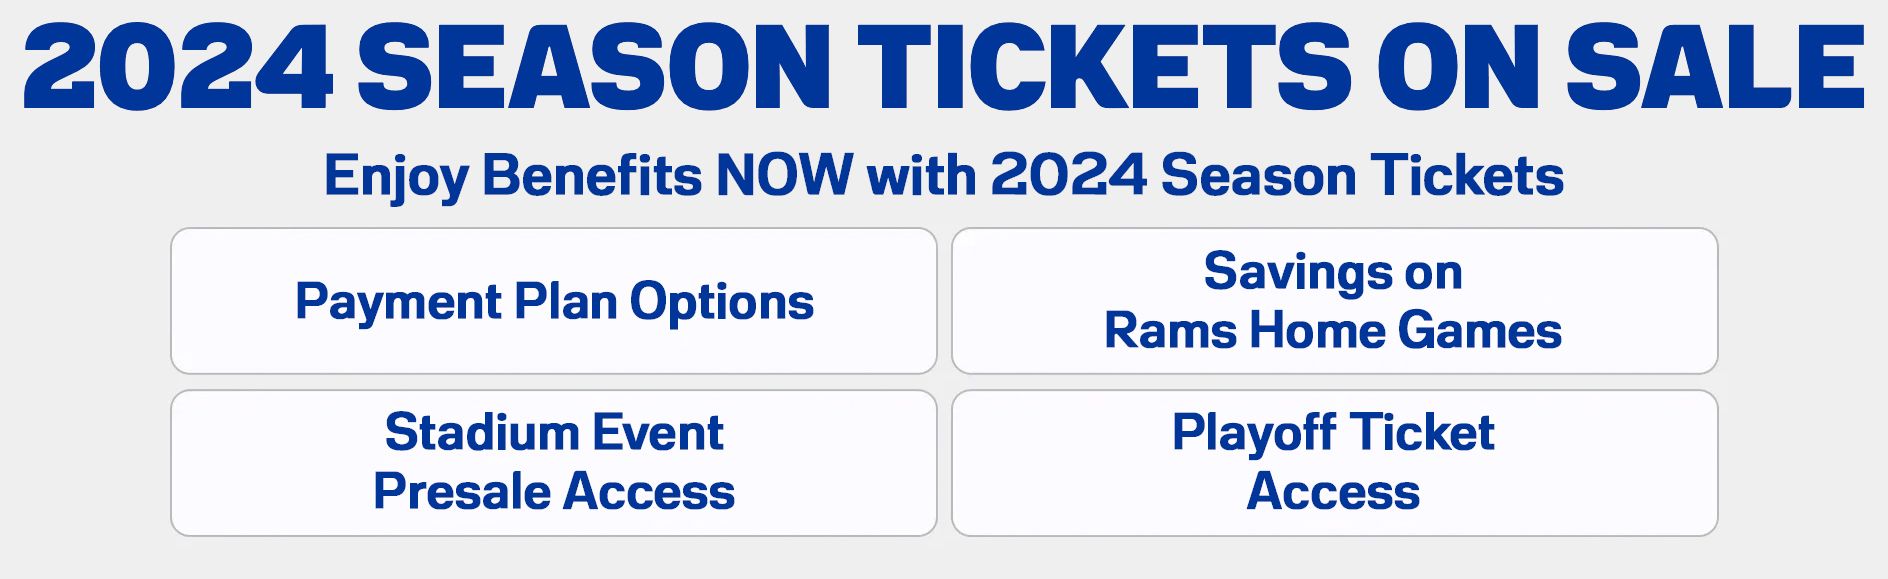 SEASON TICKET SALES FOR THE GROUP STAGE HAVE STARTED! 